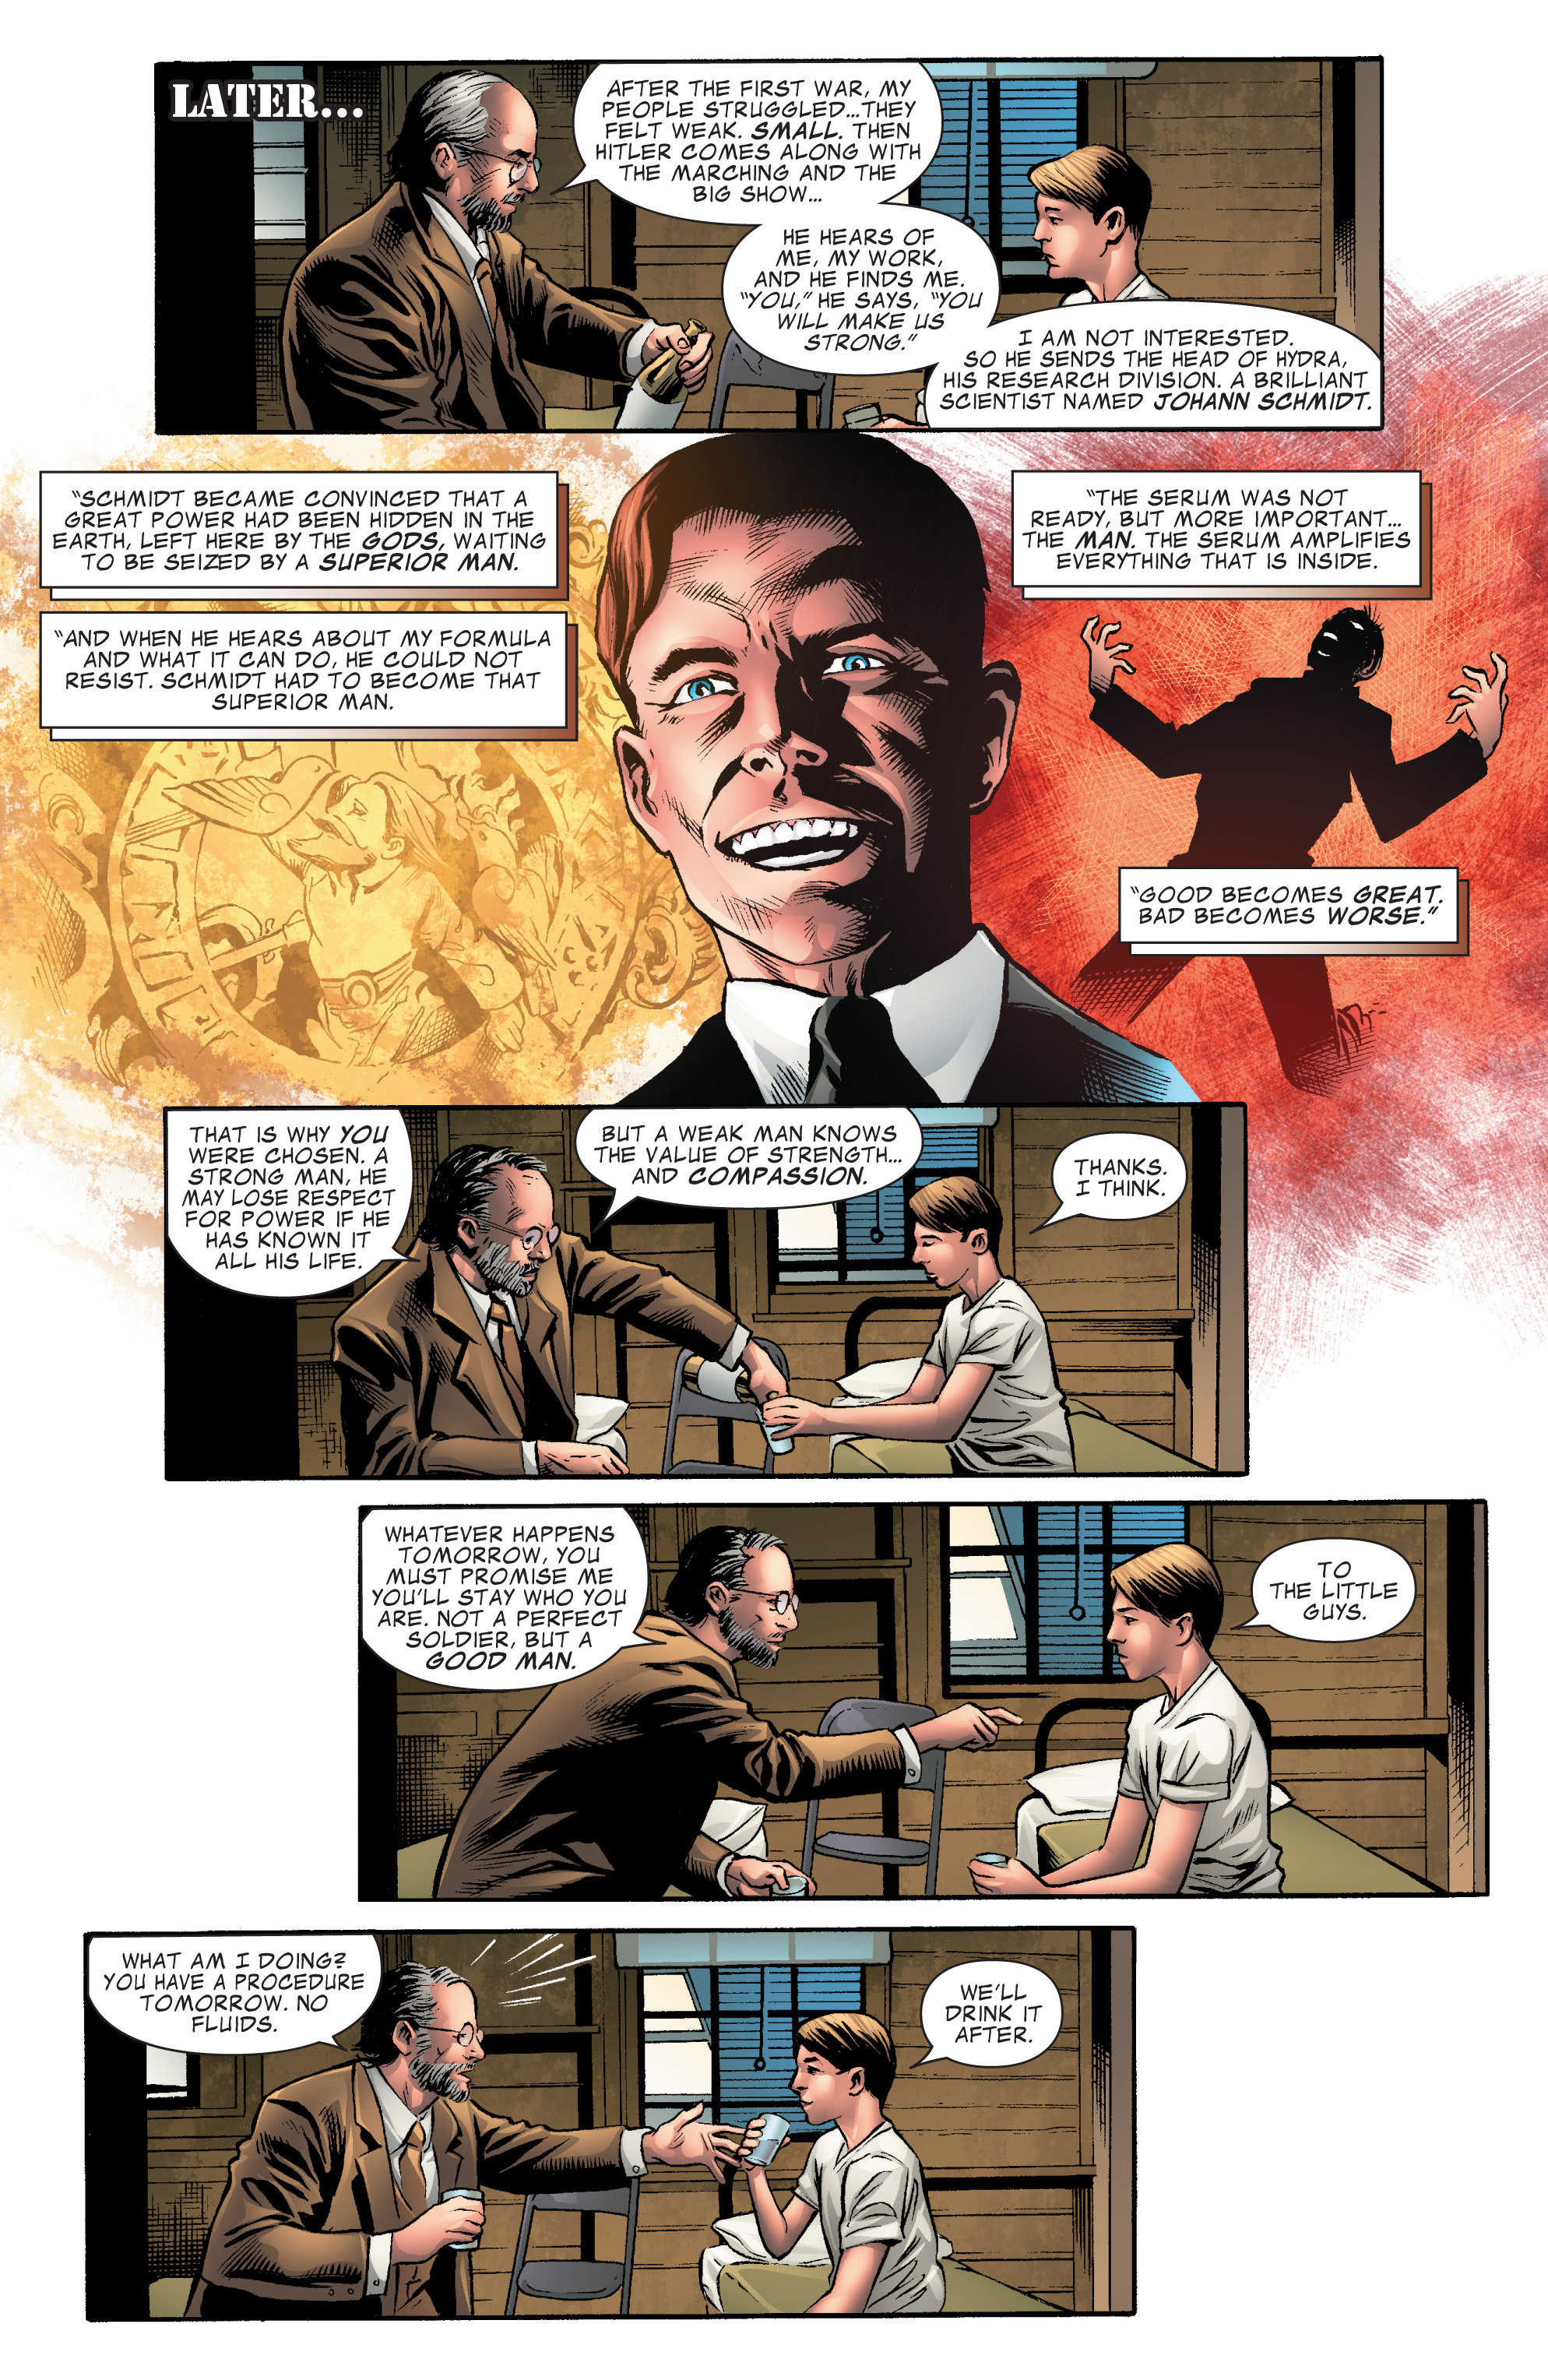 Captain America: The First Avenger Adaptation 1 Page 4